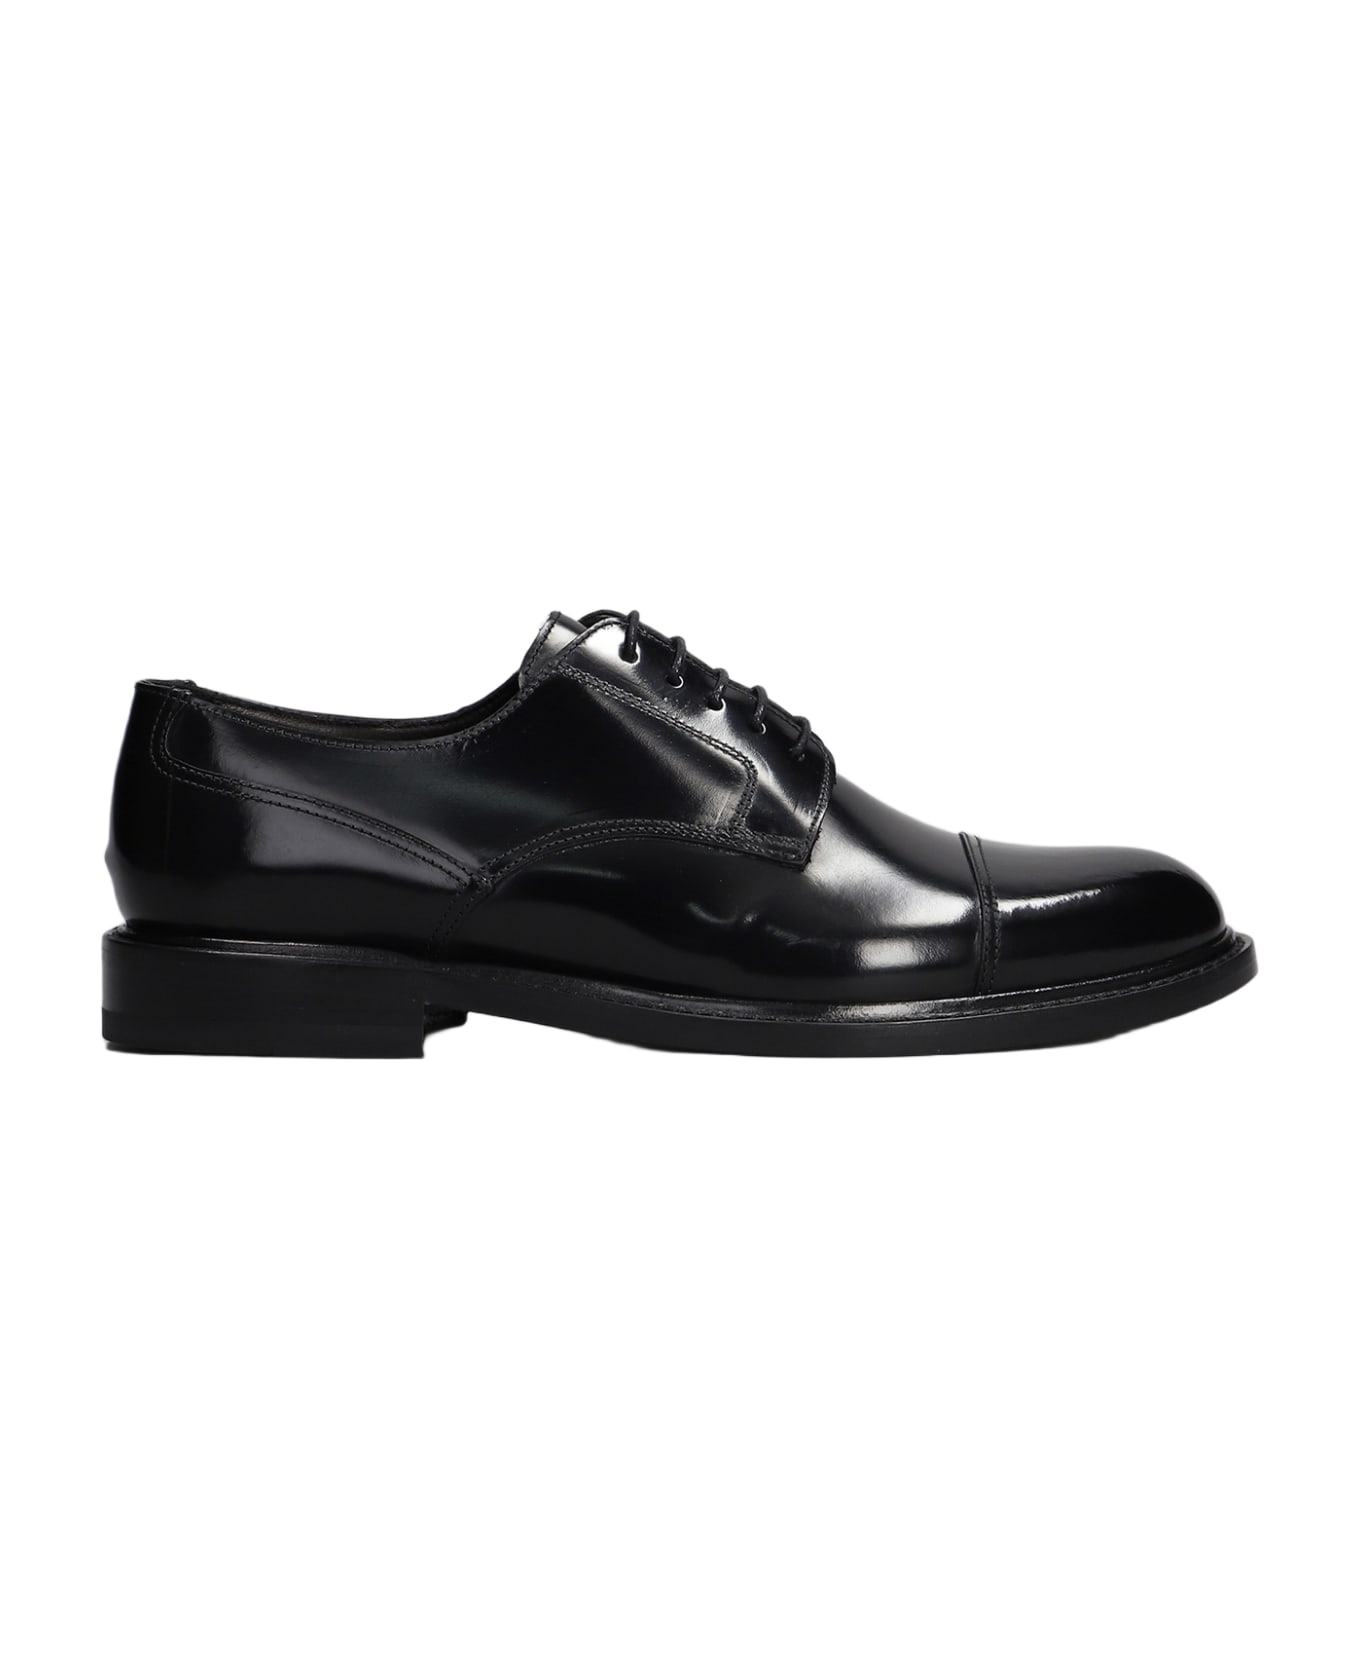 Tagliatore 0205 Casey Lace Up Shoes In Black Leather - black